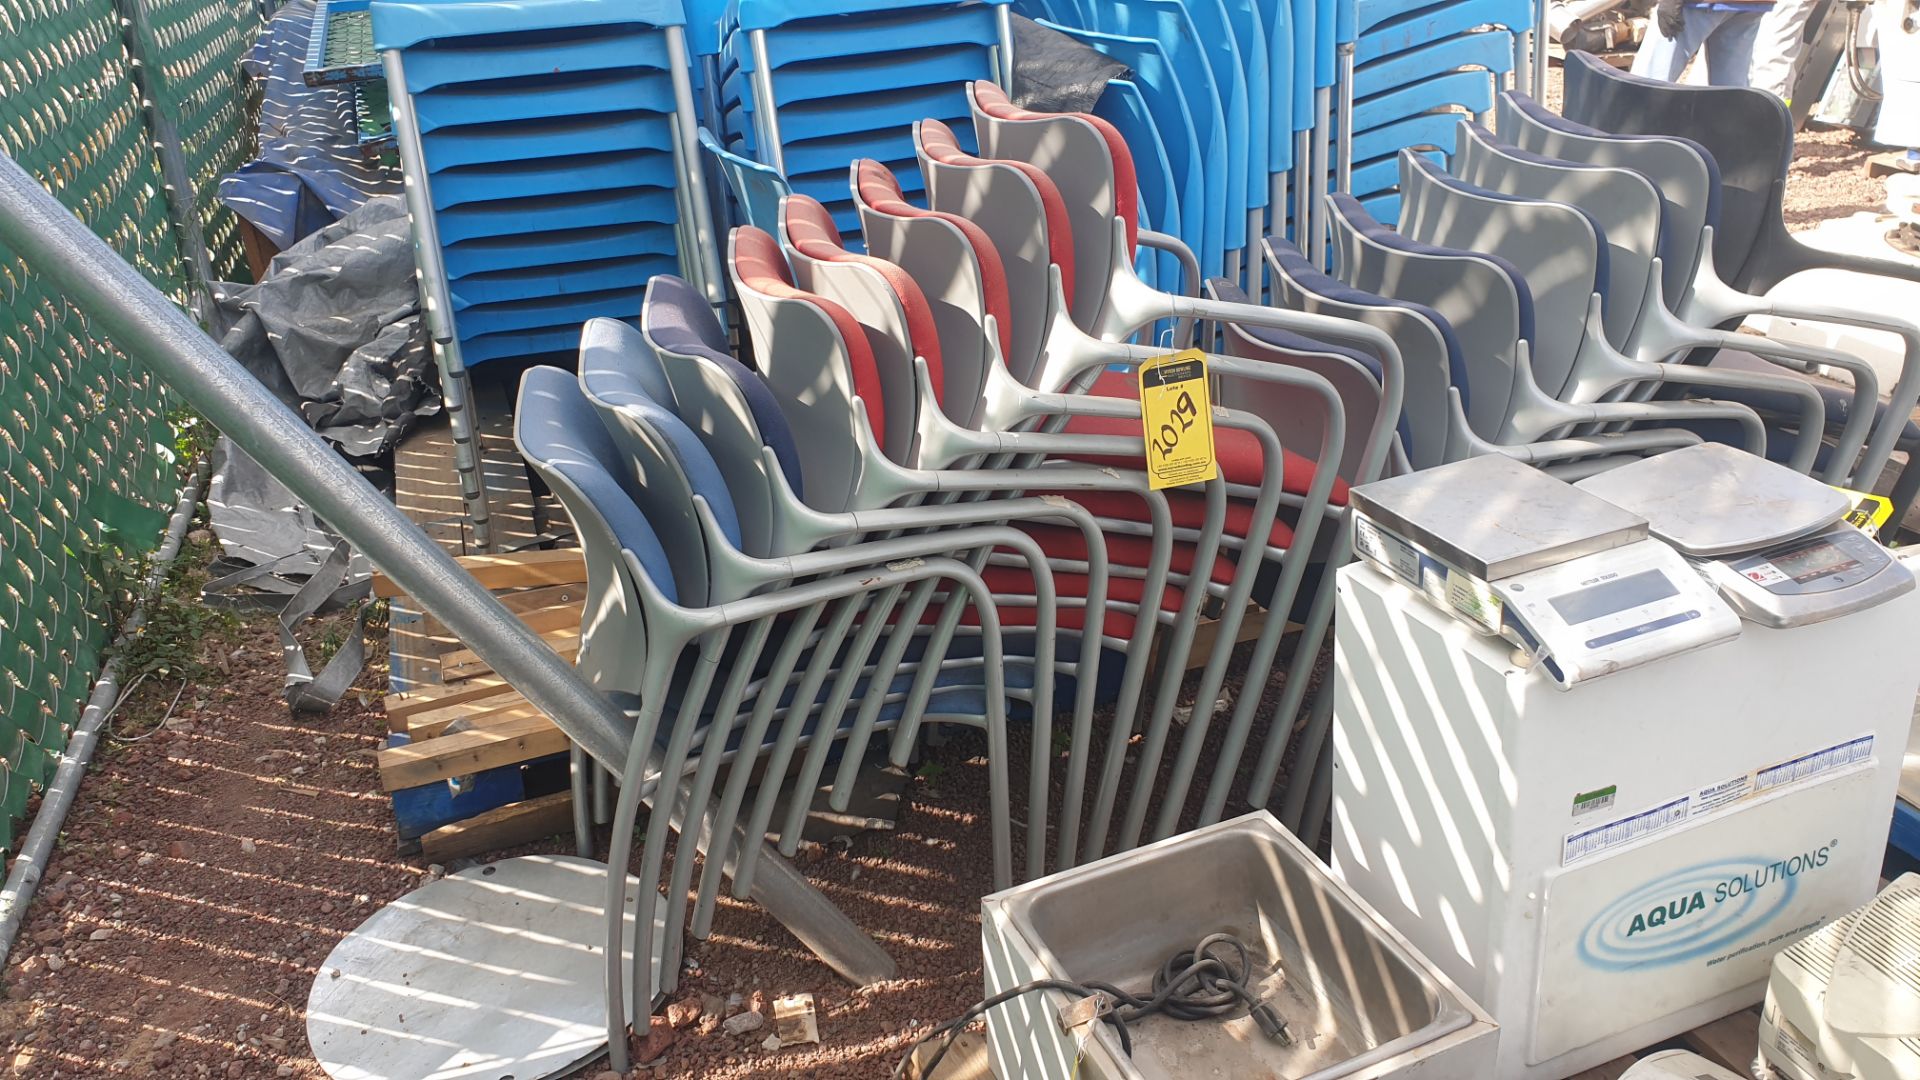 1 Lote of 40 blue plastic chairs, 7 metal chairs for office with backrest and upholstered seat - Bild 3 aus 22